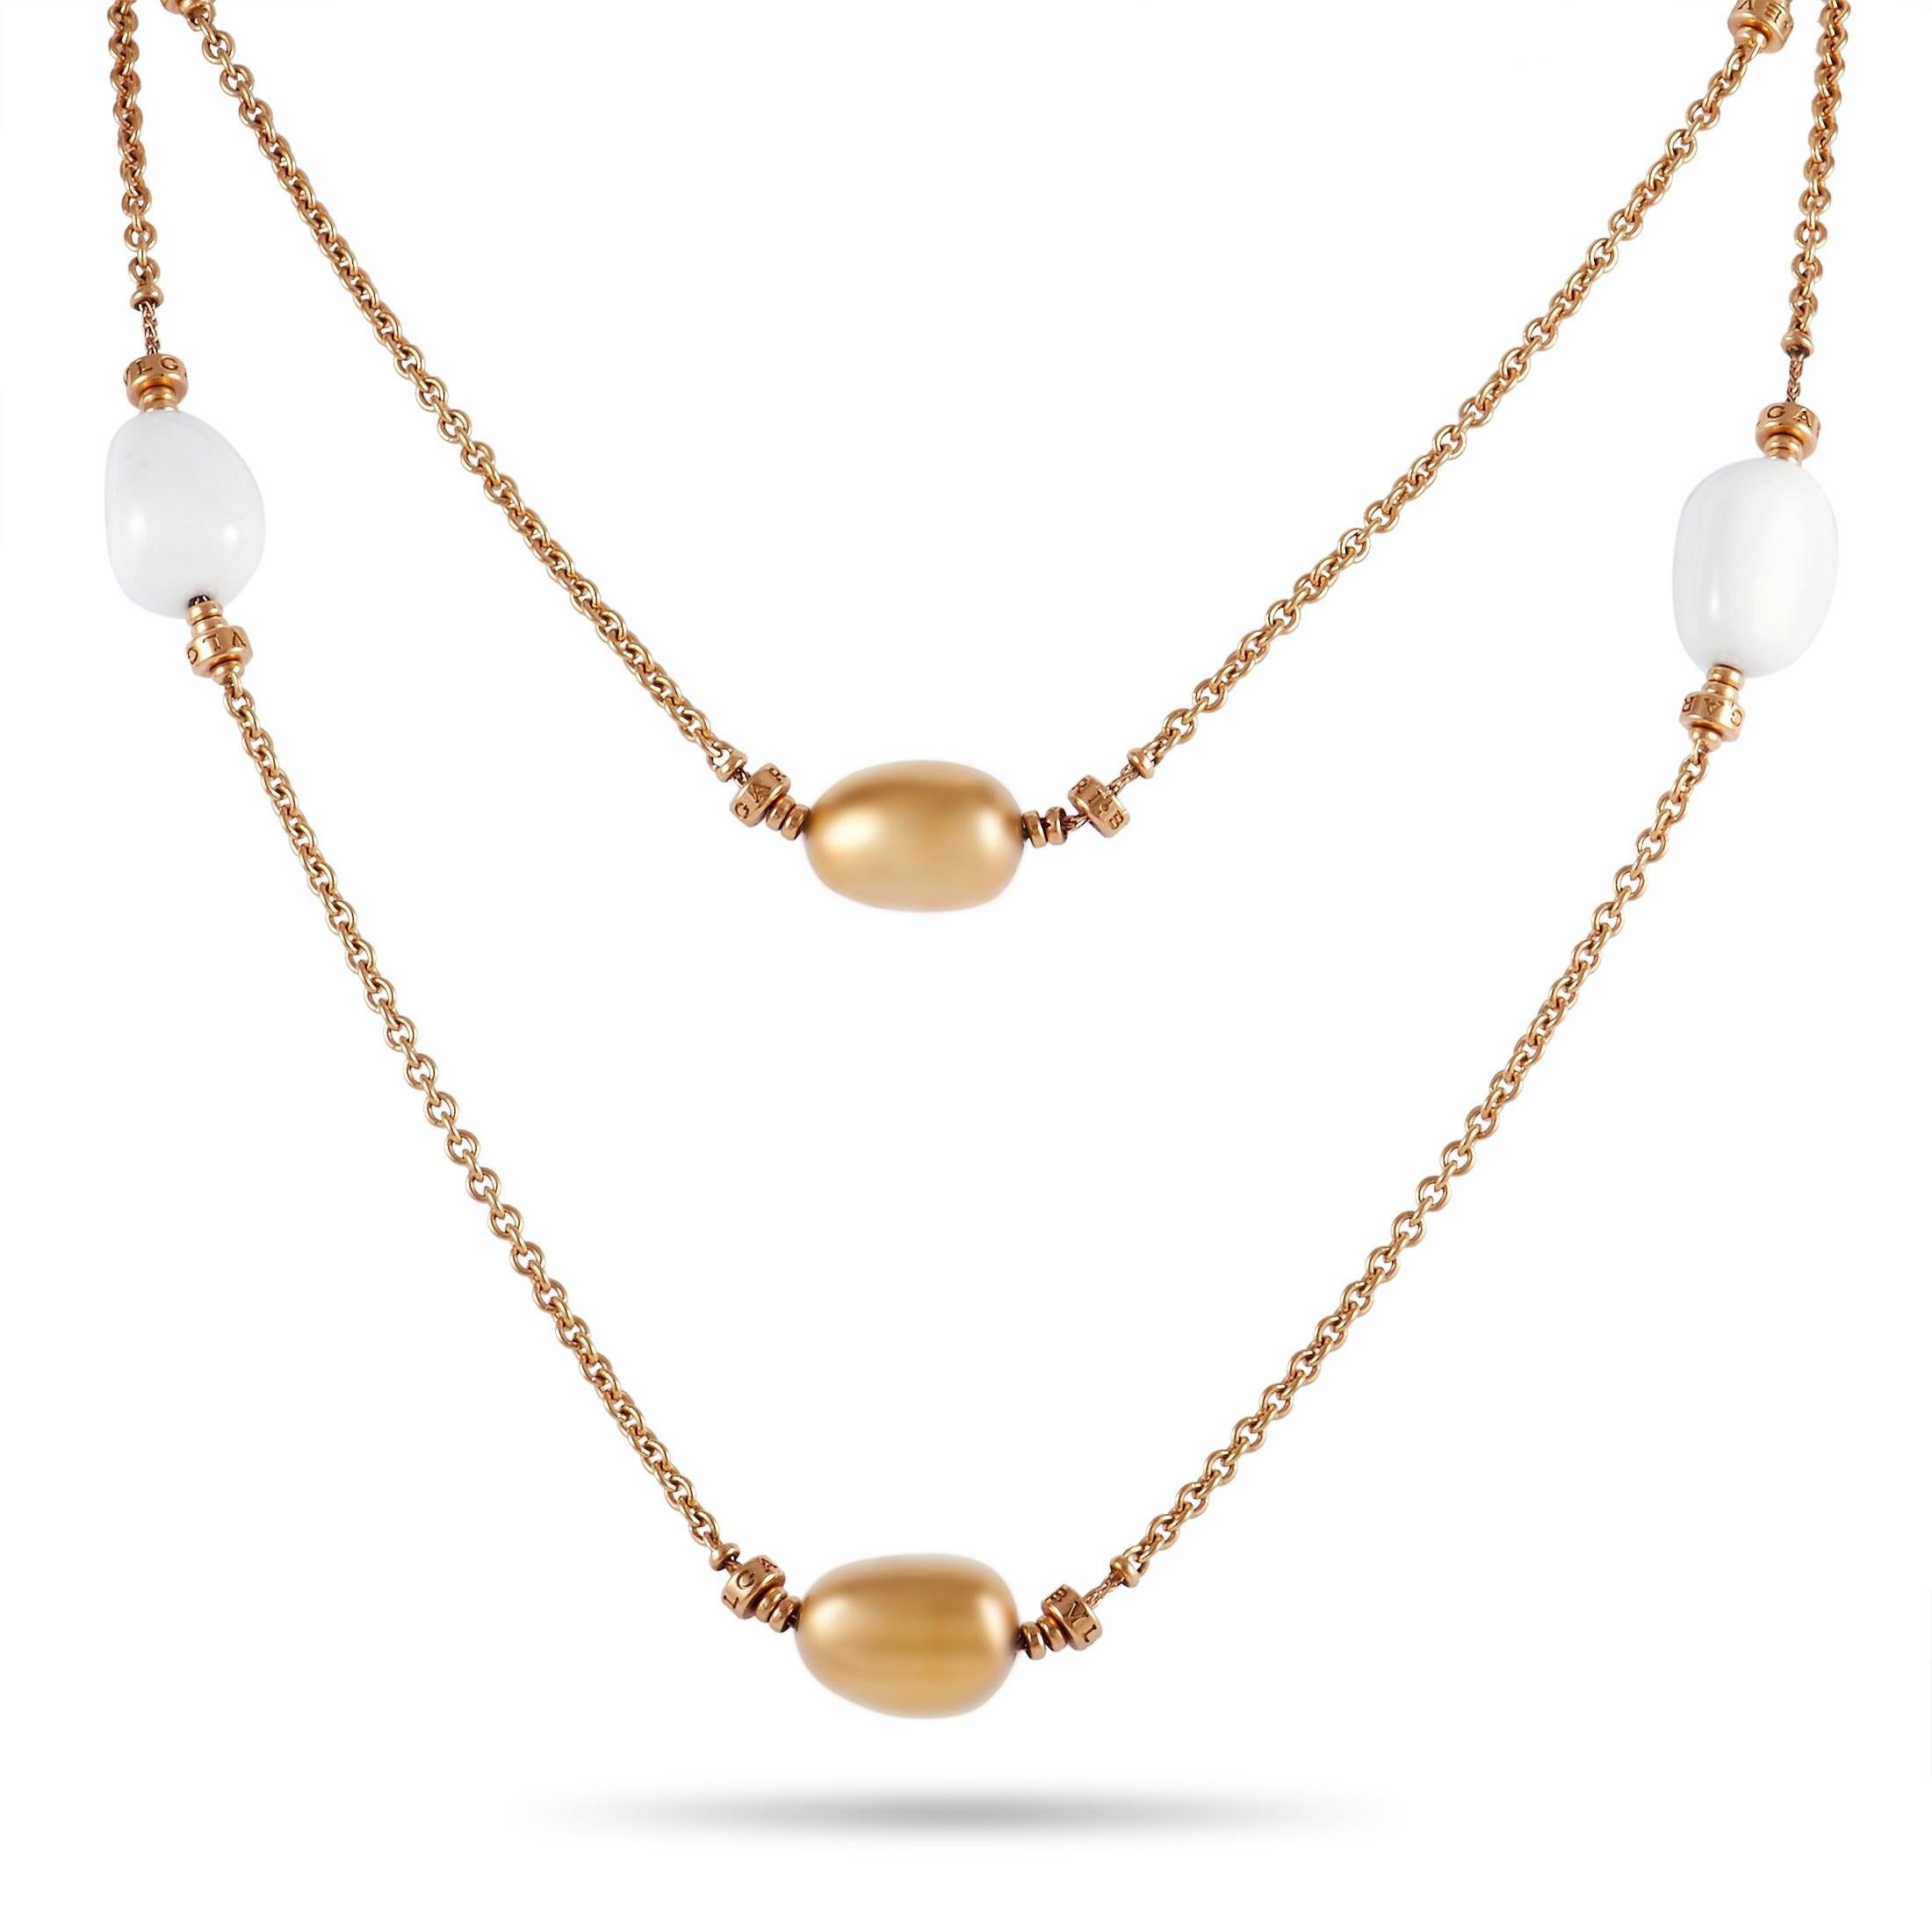 Bvlgari Mediterranean Eden 18K Rose Gold White Agate Necklace In Excellent Condition For Sale In Southampton, PA